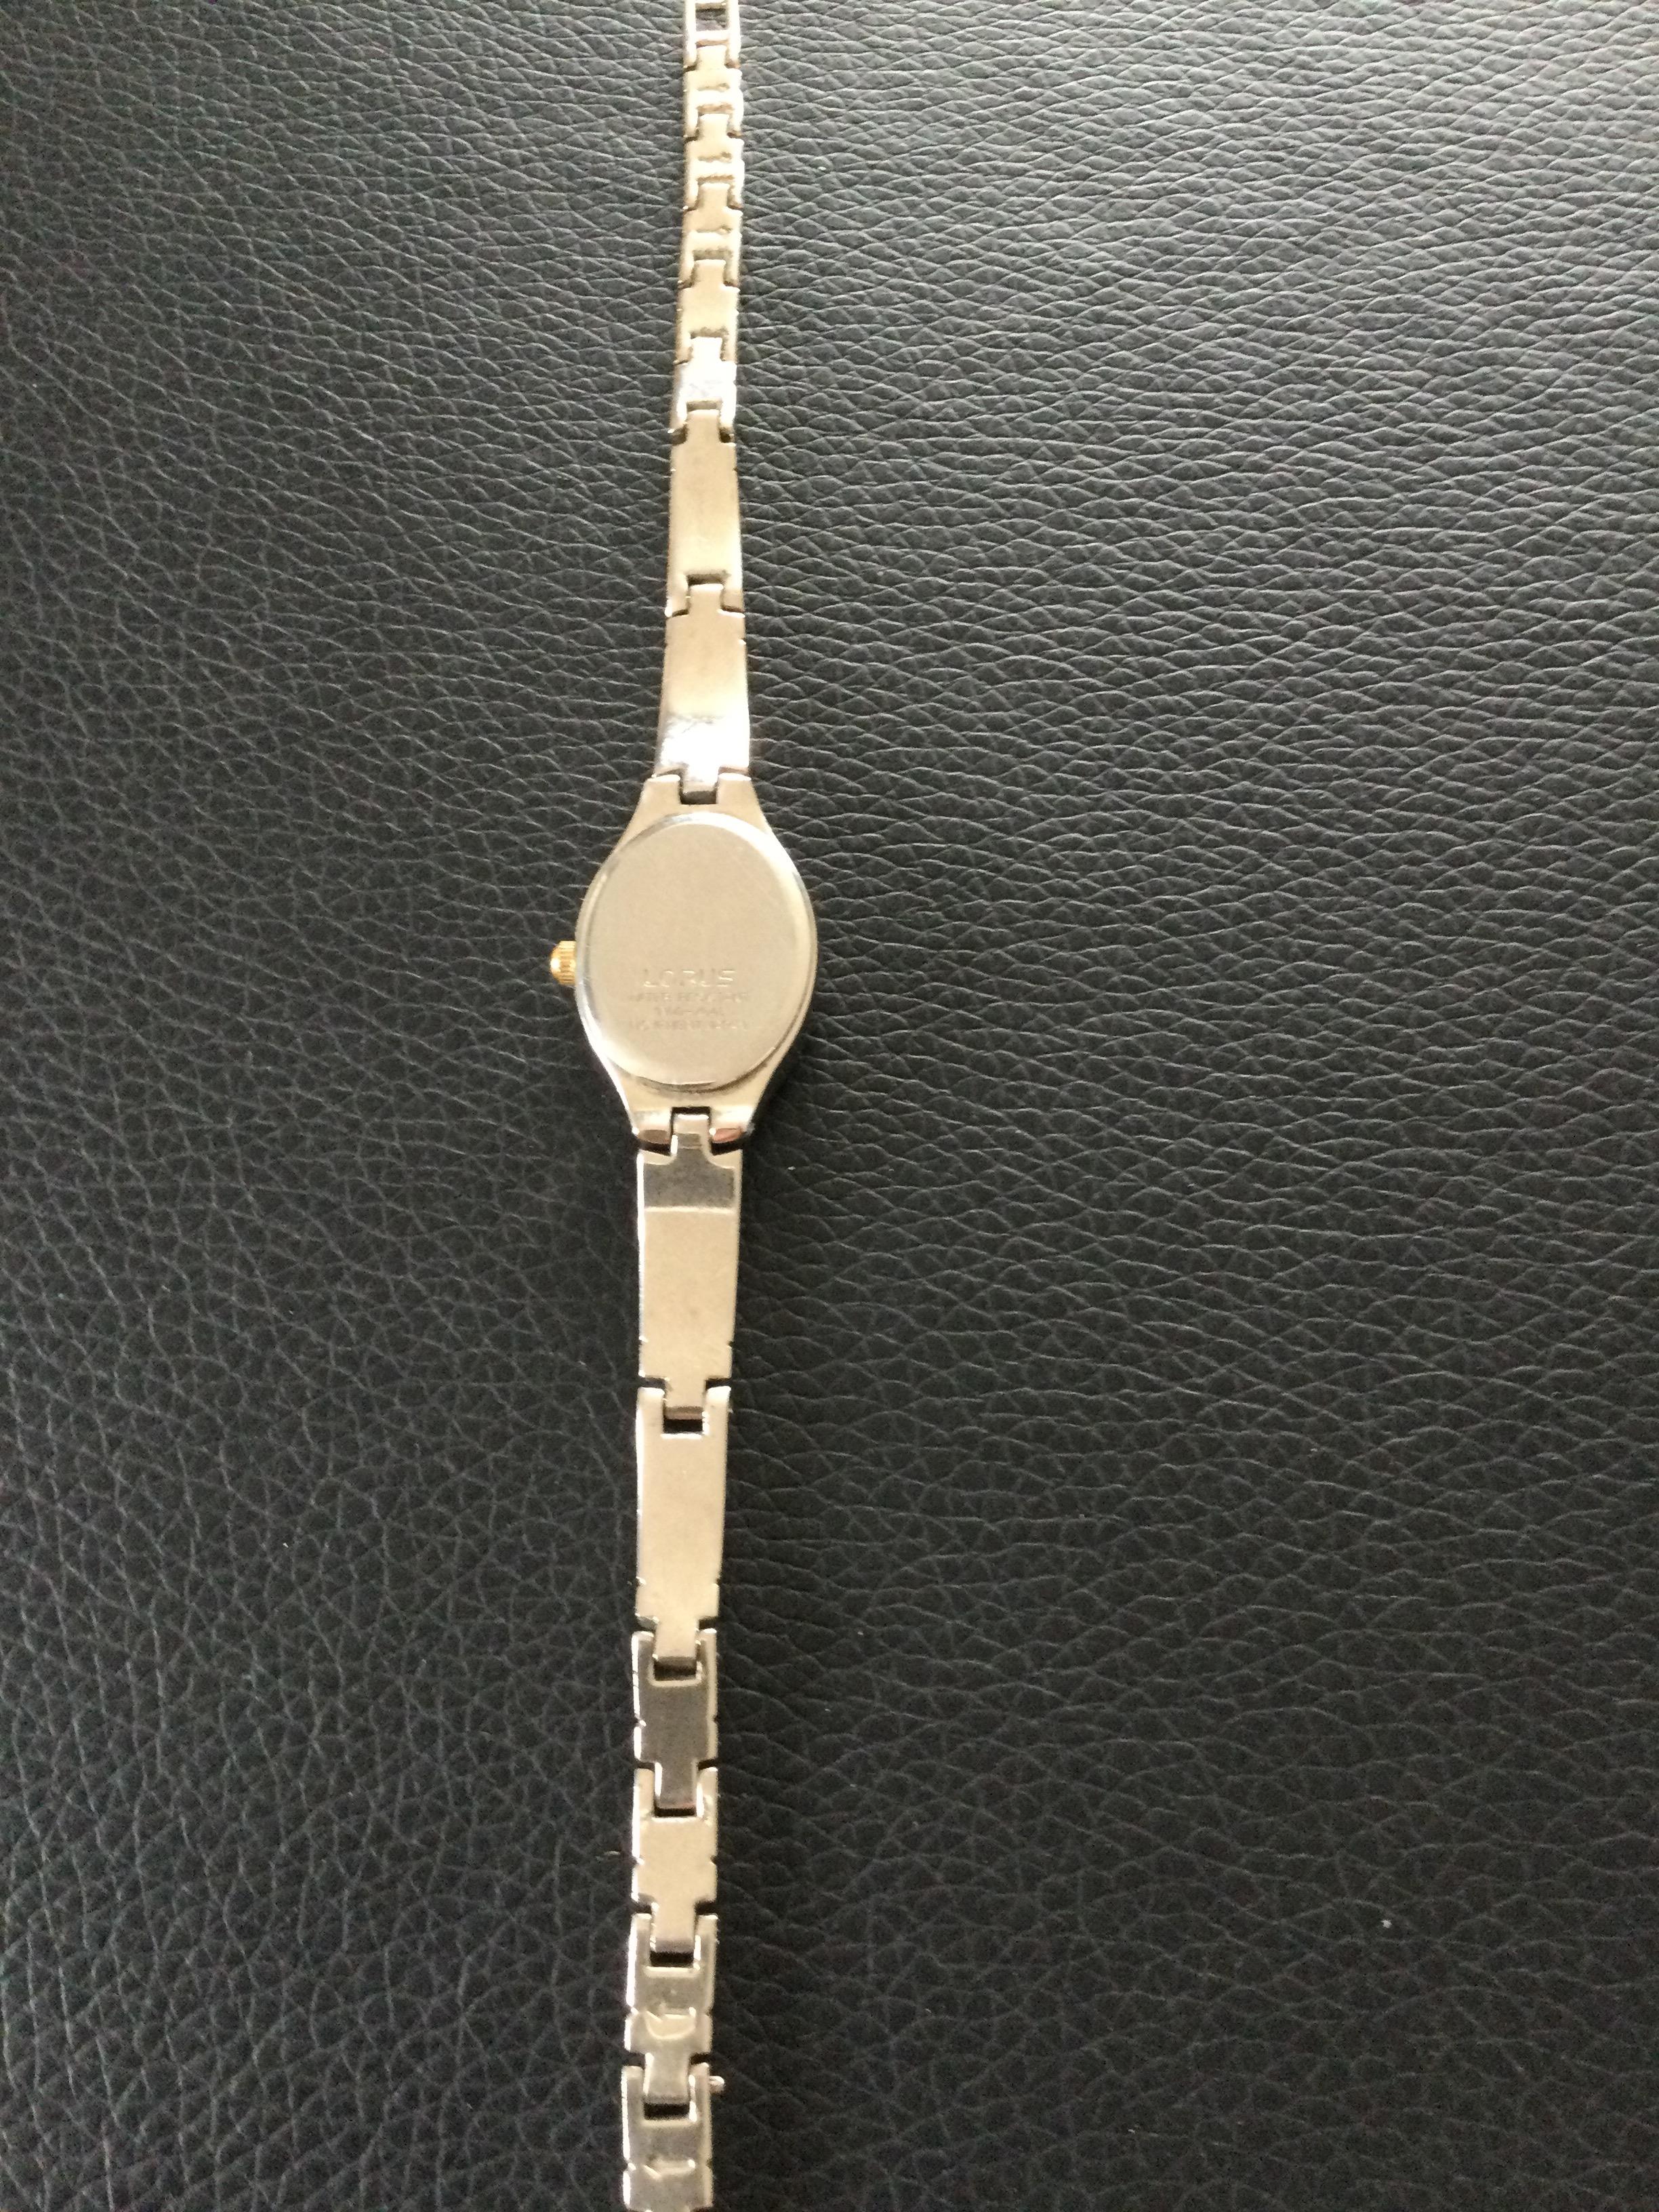 Elegant Lorus Ladies Quartz Wristwatch with Gold Plated Hands (GS 120) A lovely and elegant - Image 2 of 4